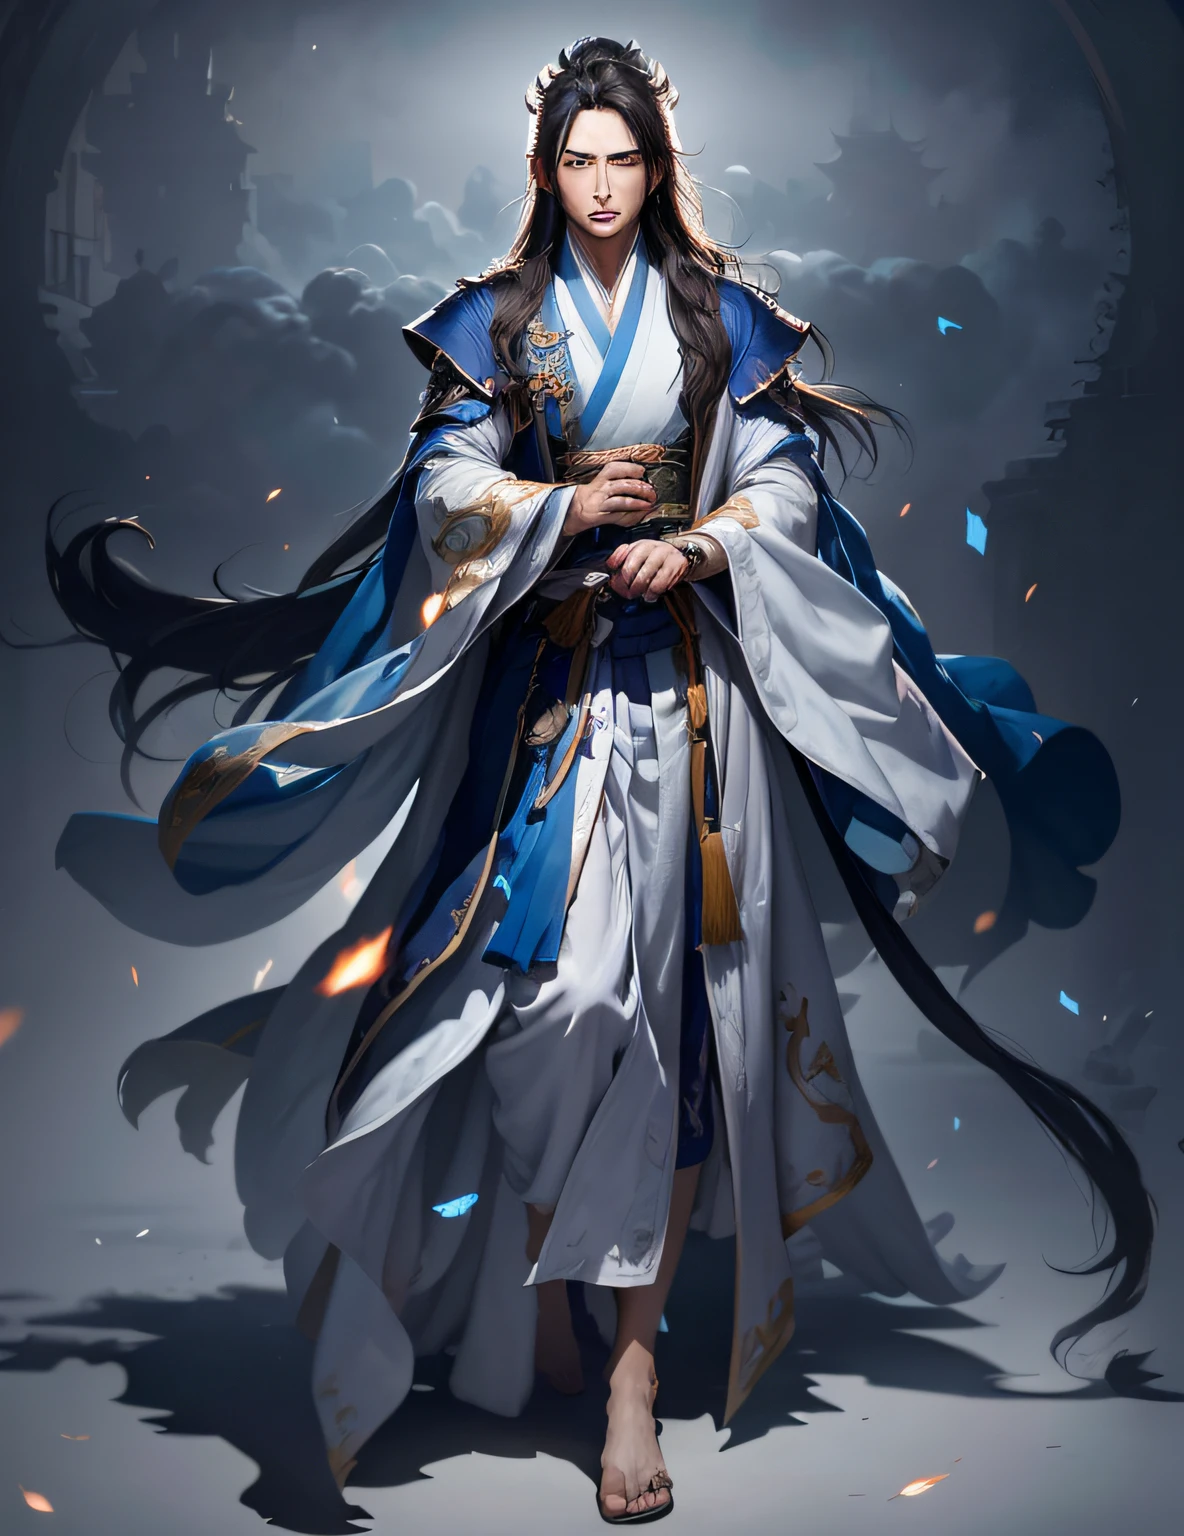 image of a man dressed in a blue and white robe, heise jinyao, full body xianxia, full body wuxia, flowing hair and long robes, picture of a male cleric, wearing flowing robes, inspired by Cao Zhibai, zhao yun, cotton cloud mage robes, inspired by Wu Daozi,hanfu,Blue magic between the palms,heise jinyao, full body xianxia, picture of a male cleric, flowing hair and long robes, zhao yun, skinny male fantasy alchemist, full body wuxia, inspired by Cao Zhibai, wearing flowing robes, cotton cloud mage robes, skinny male mage,best shadow, sharp focus, masterpiece, (very detailed CG unified 8k wallpaper),realistic,(hanfu),(((Character face))),